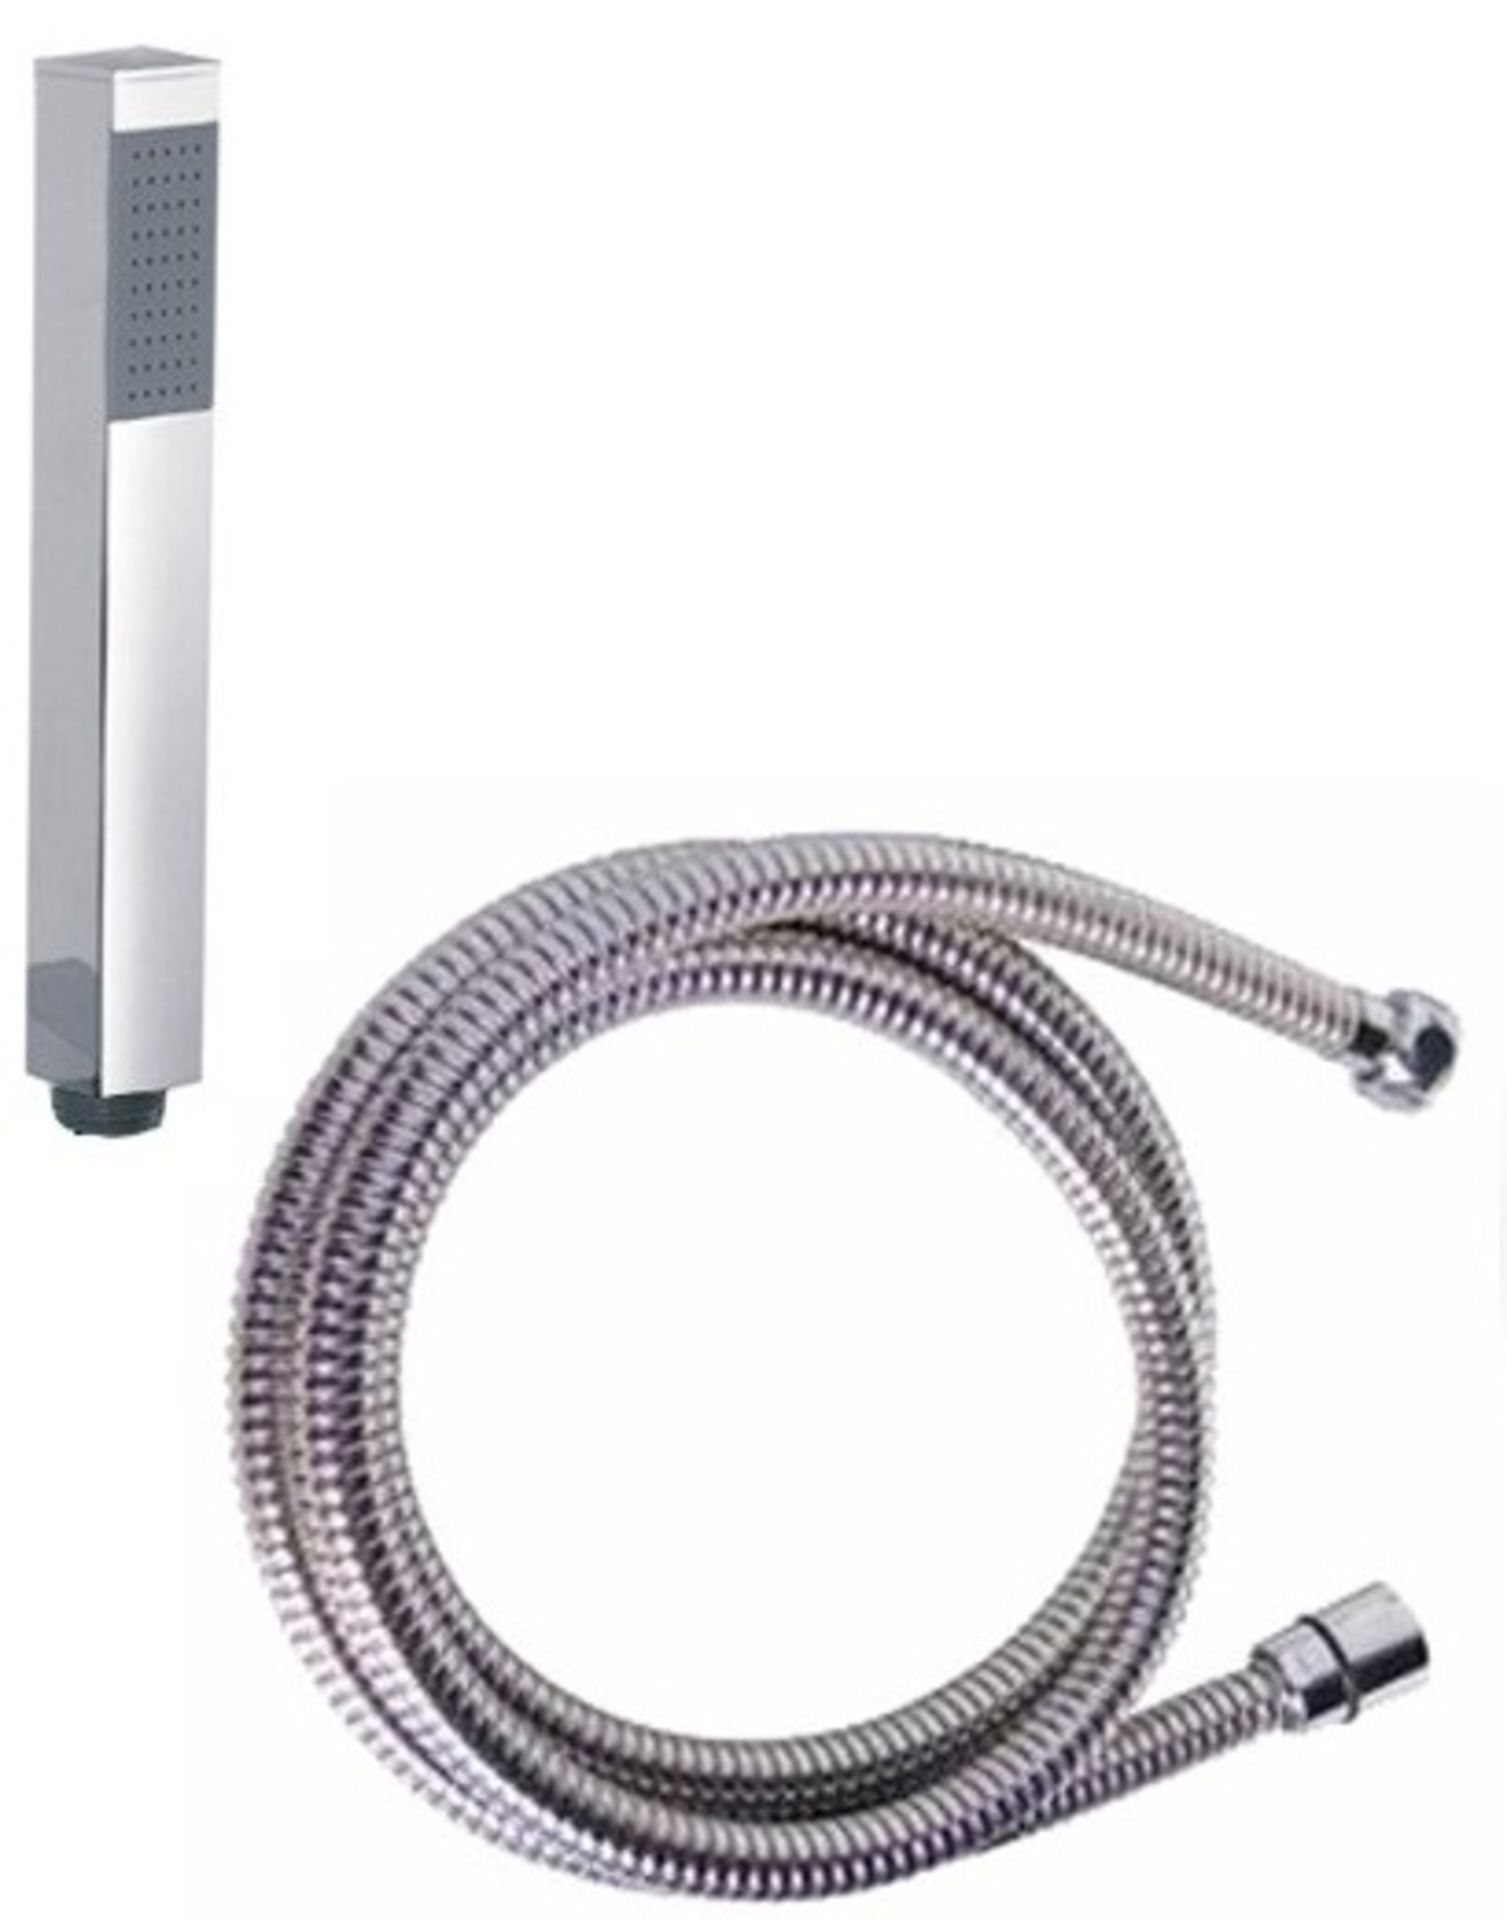 Replacement shower handset and hose